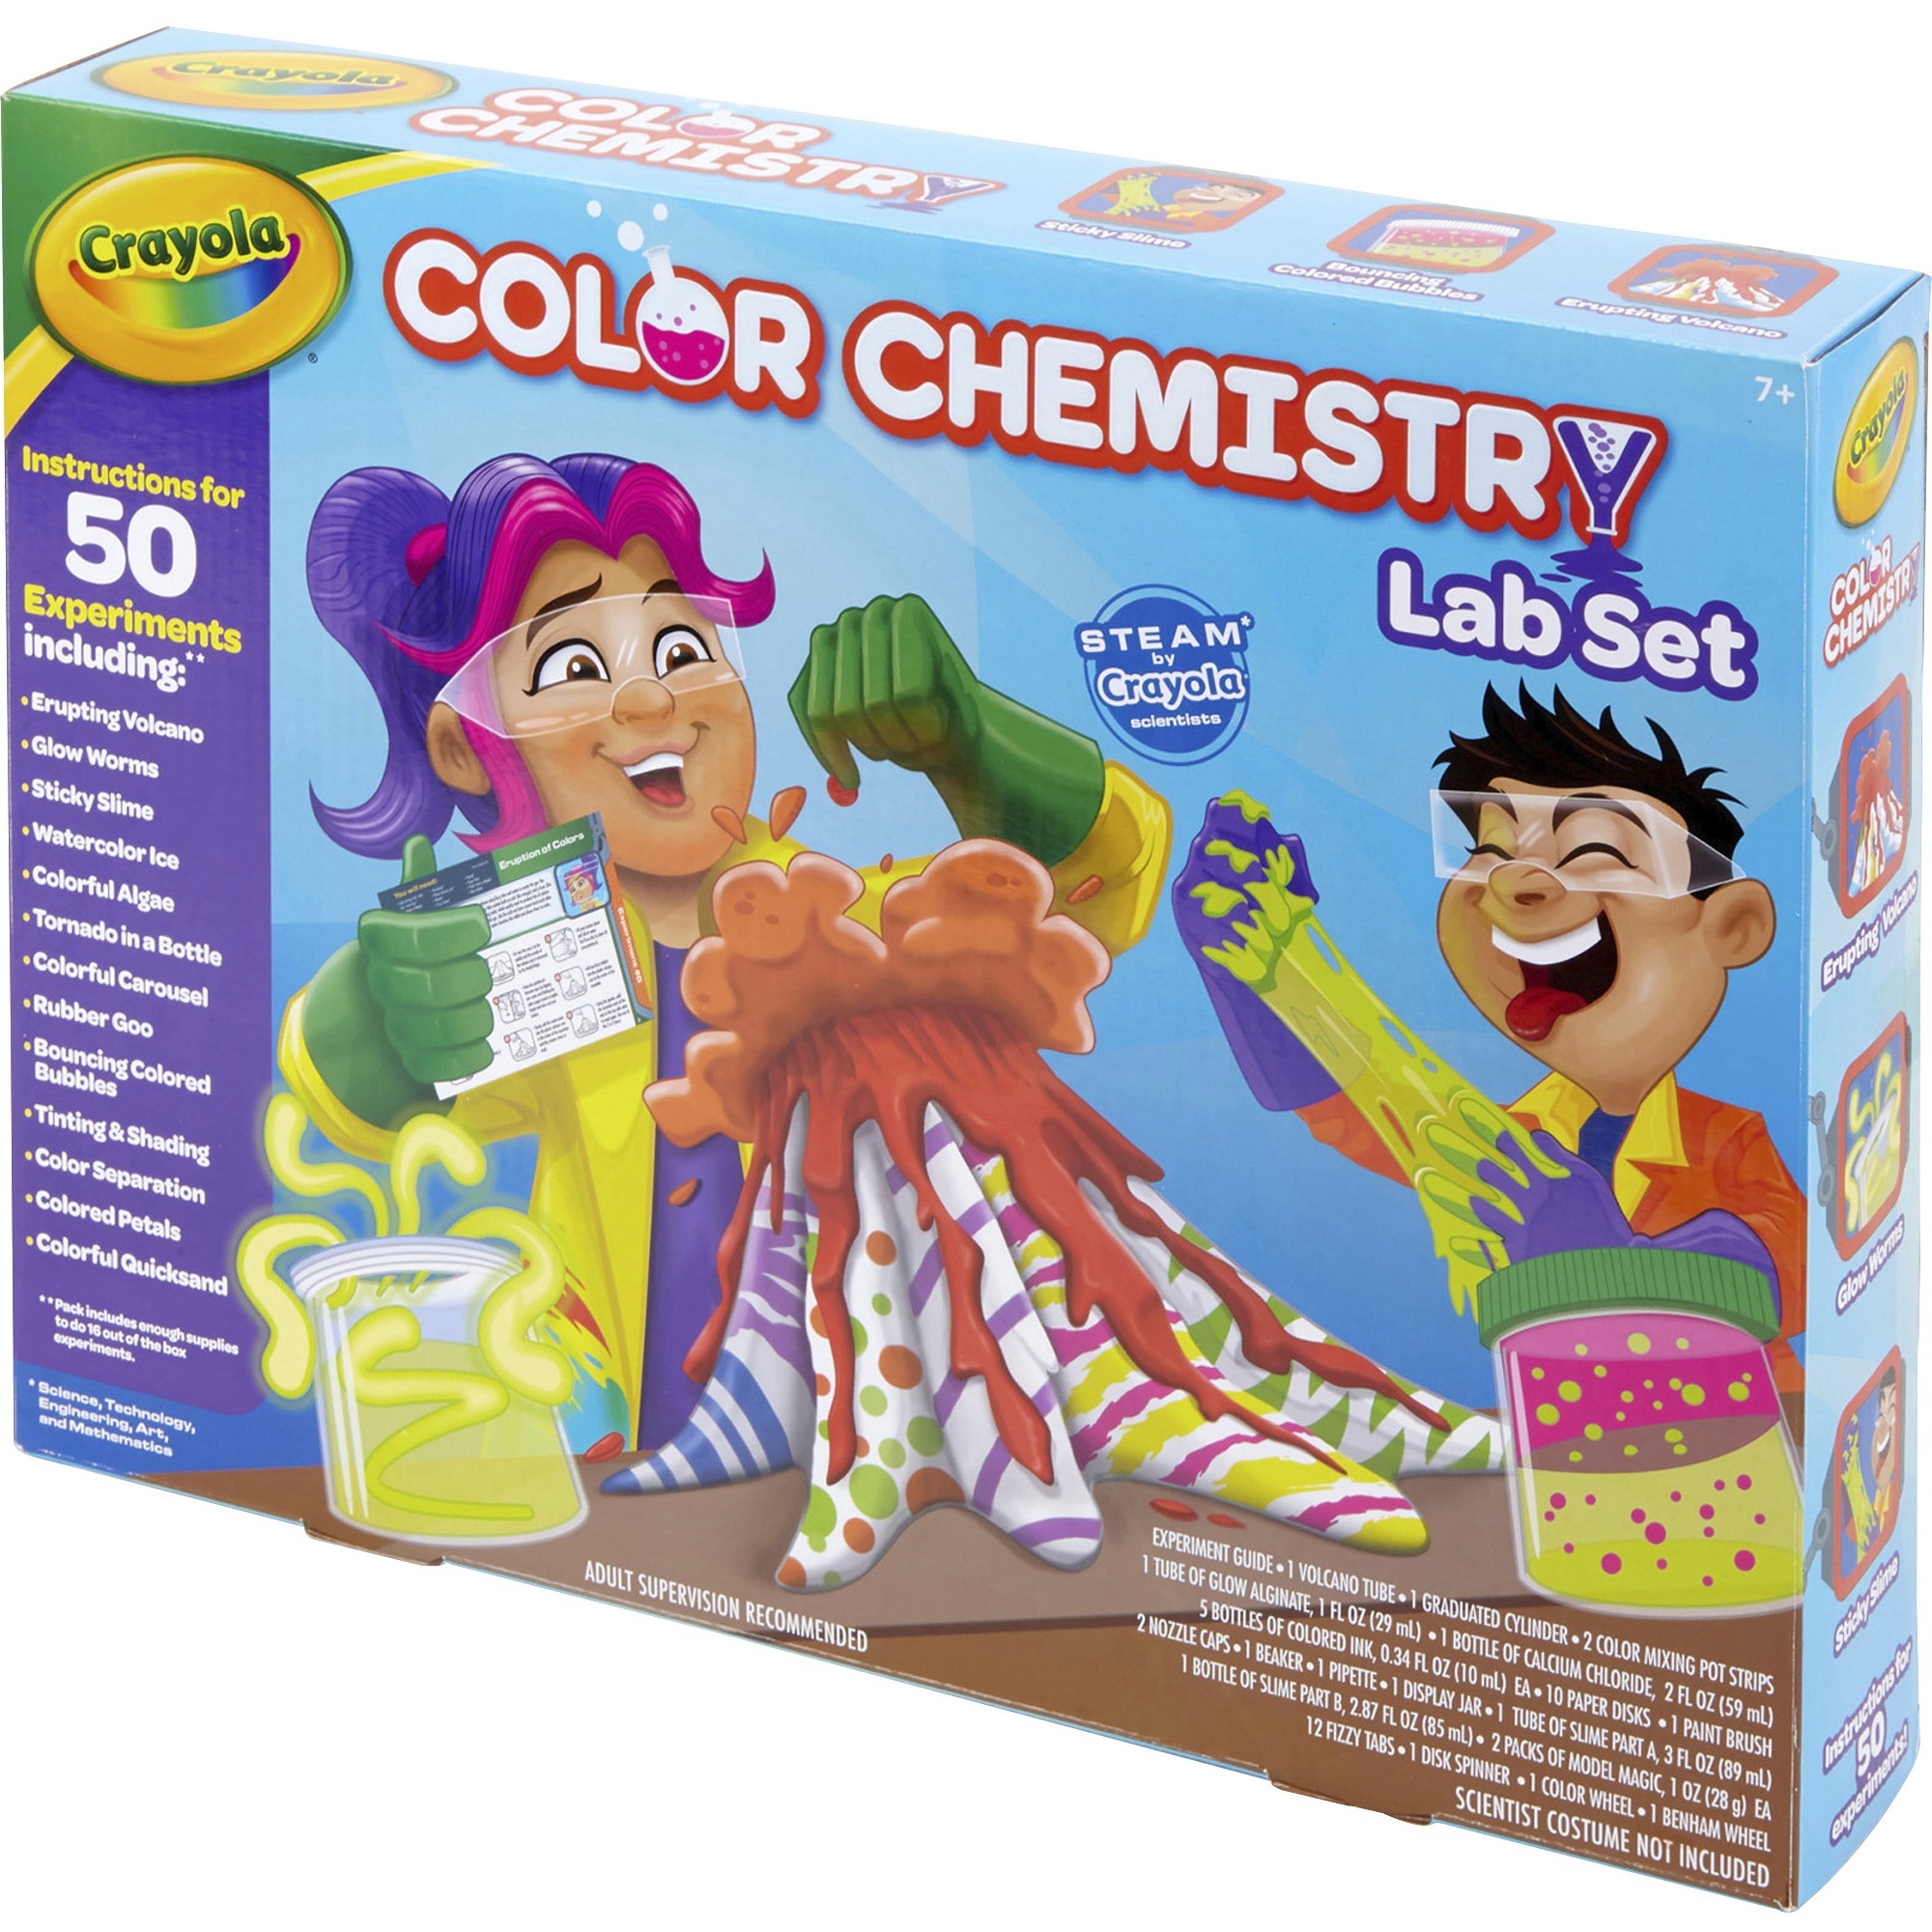  Crayola Color Chemistry Set (50 Experiments), Science